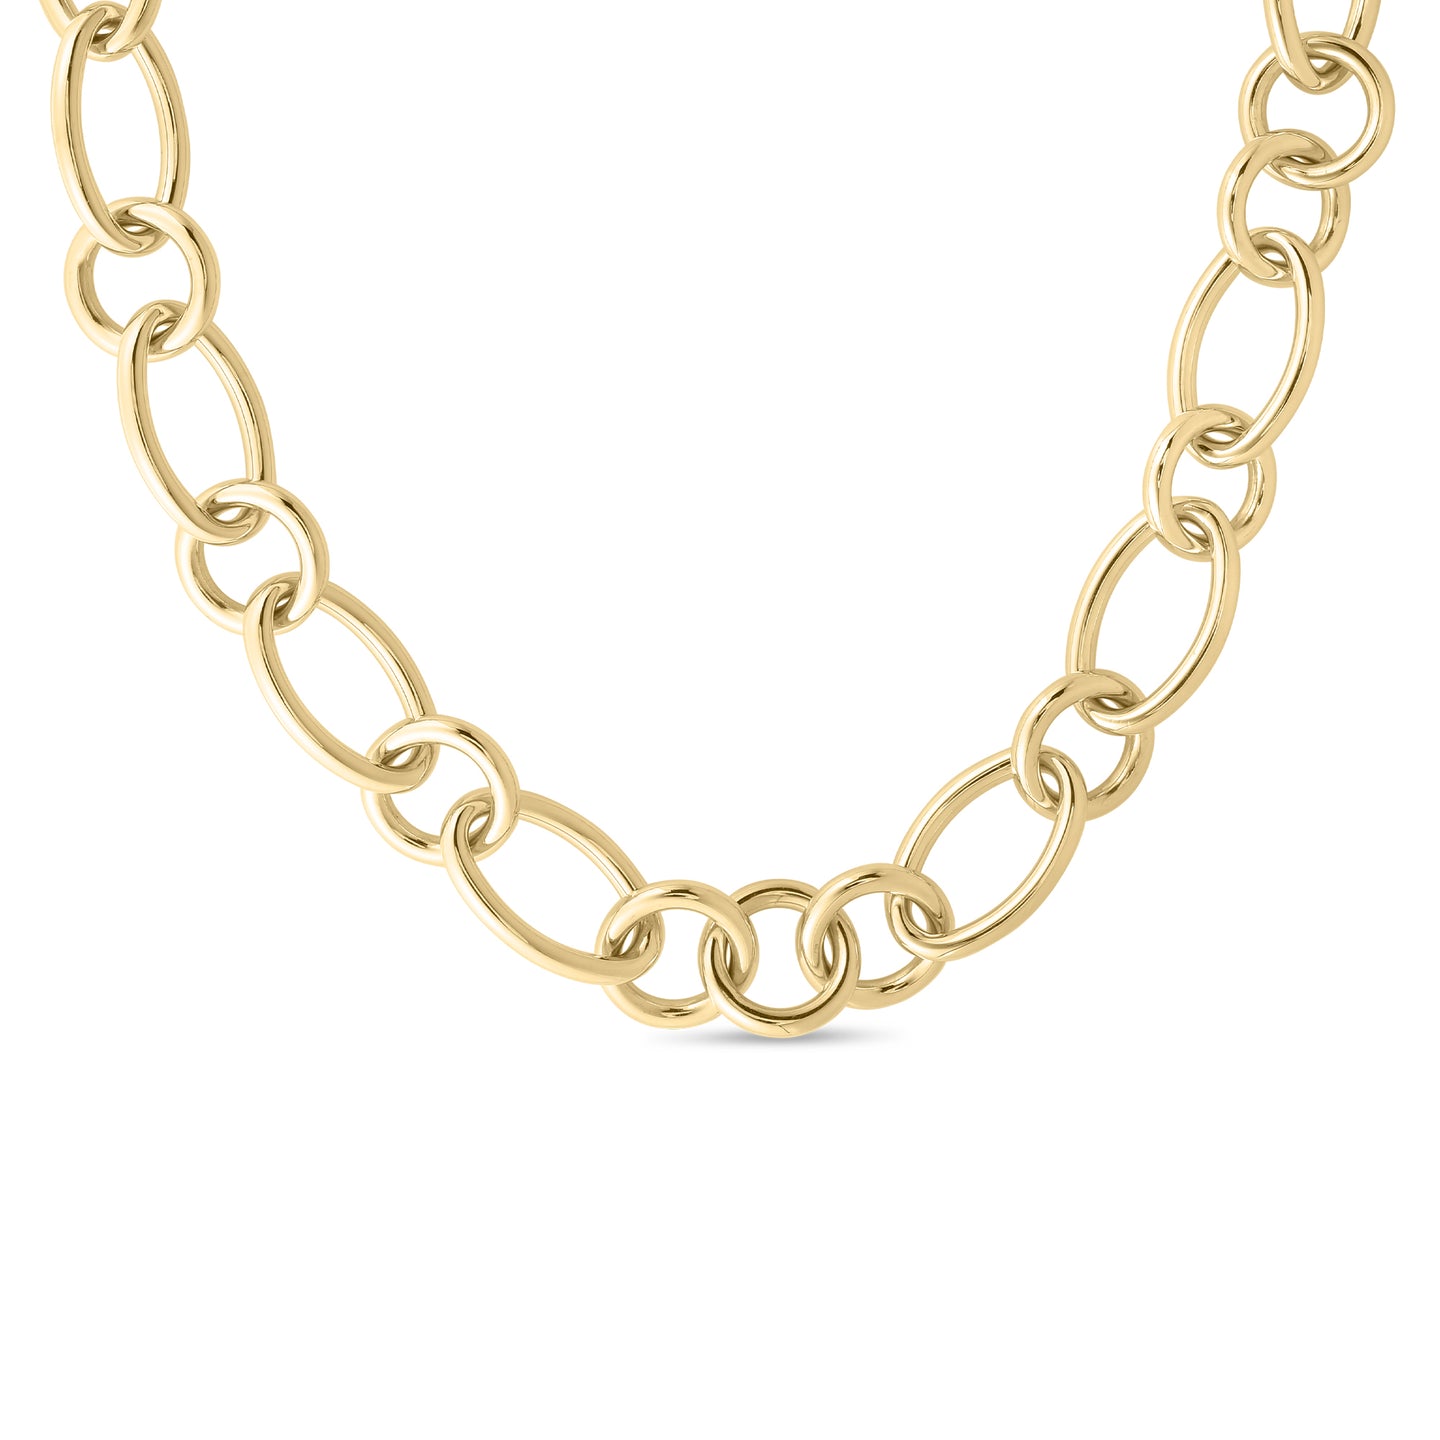 Roberto Coin Designer Gold 18K Yellow Gold Alternating Round & Oval Link Chain Necklace